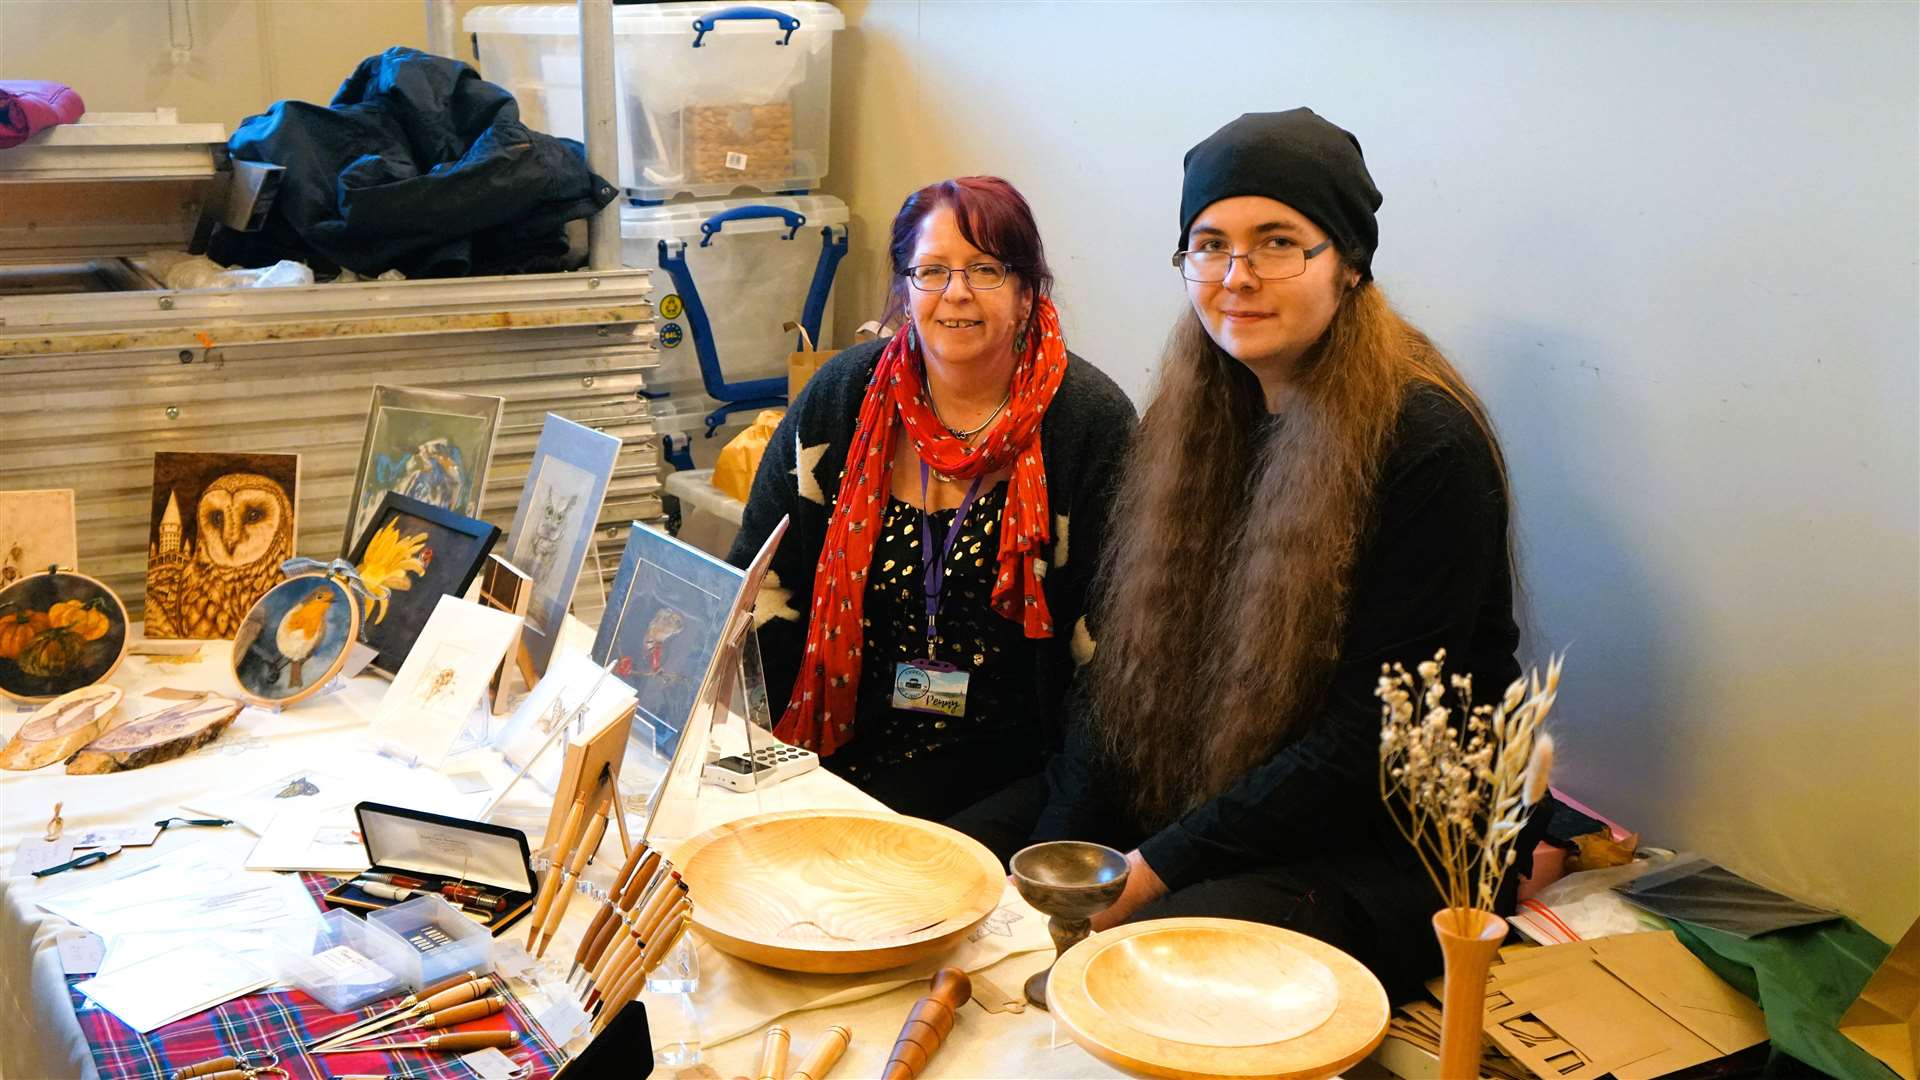 Penny Irvine, who helped organise the event, alongside her son Joshua who had some of his crafts for sale on the day. Picture: DGS